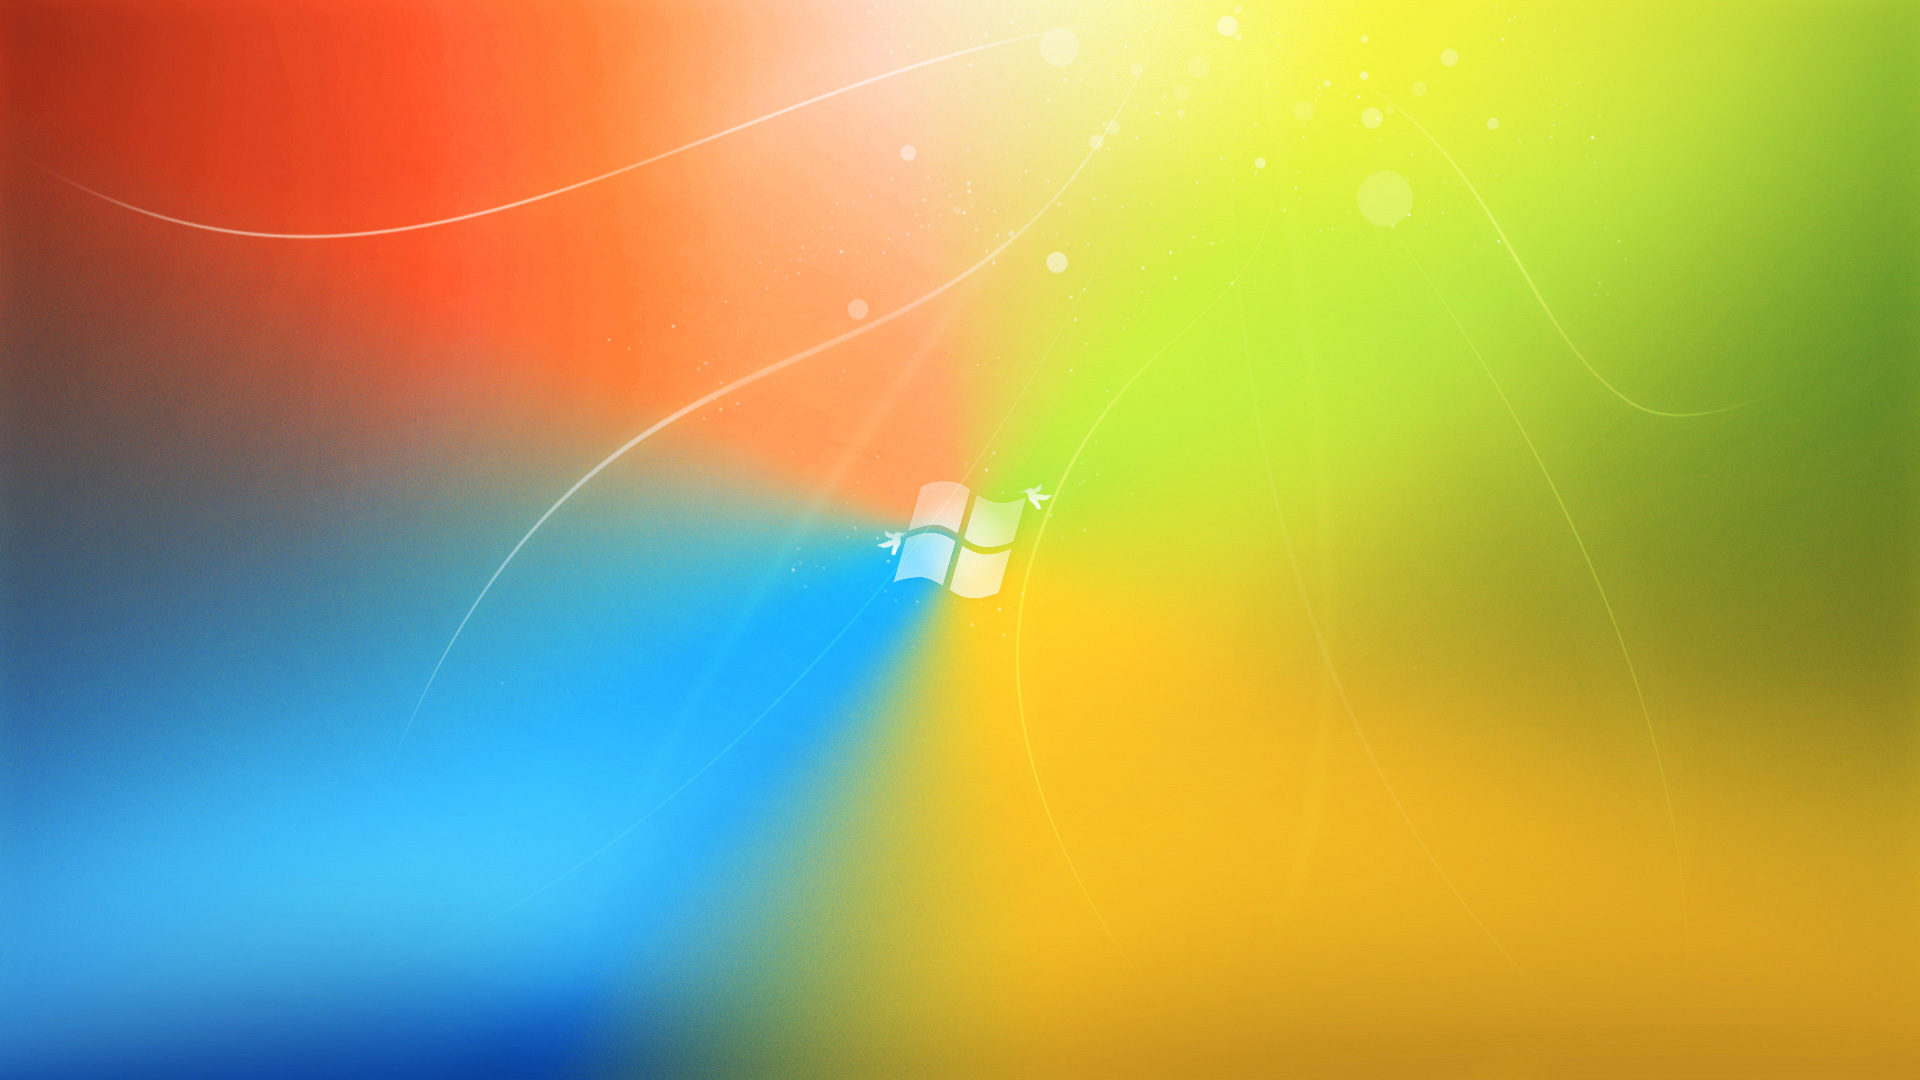 Colorful Windows 7 HD Wallpapers HD Wallpapers